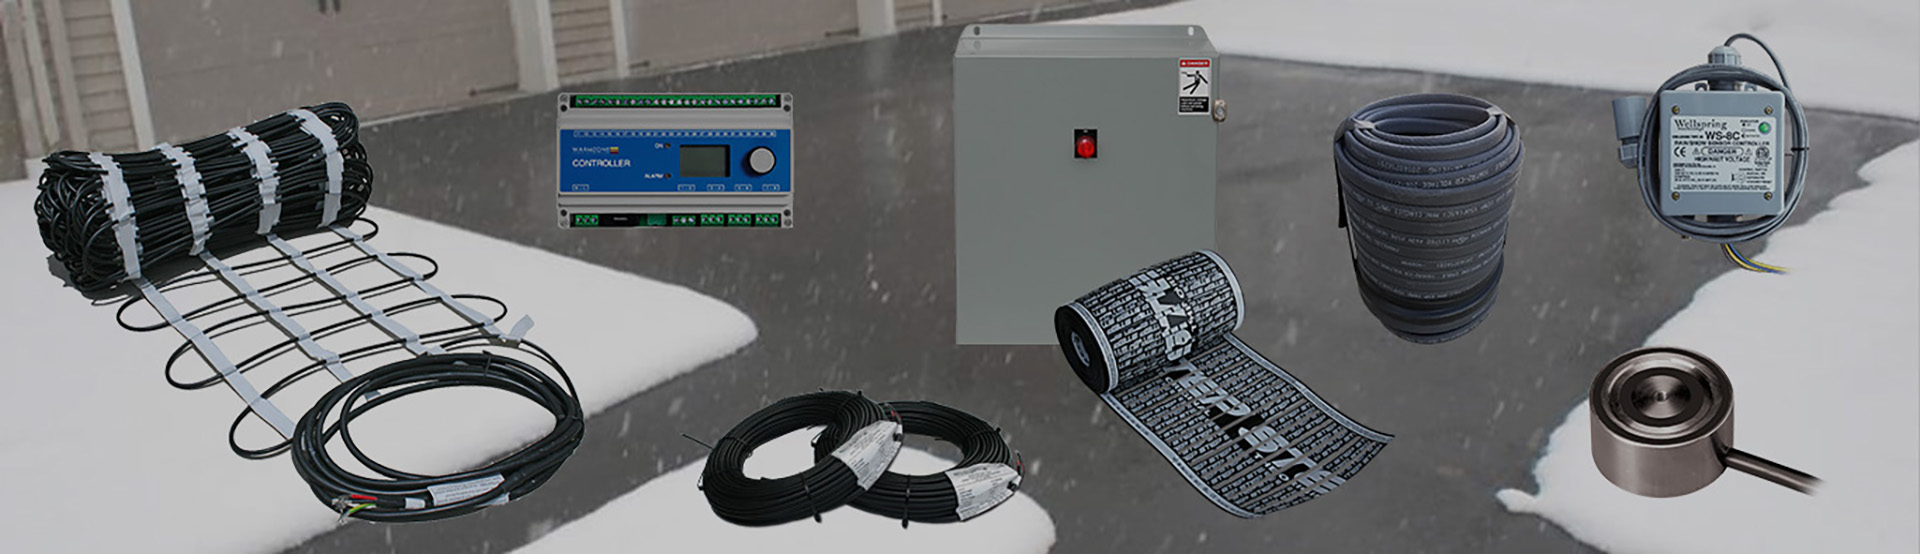 Snow melting system components Order now banner